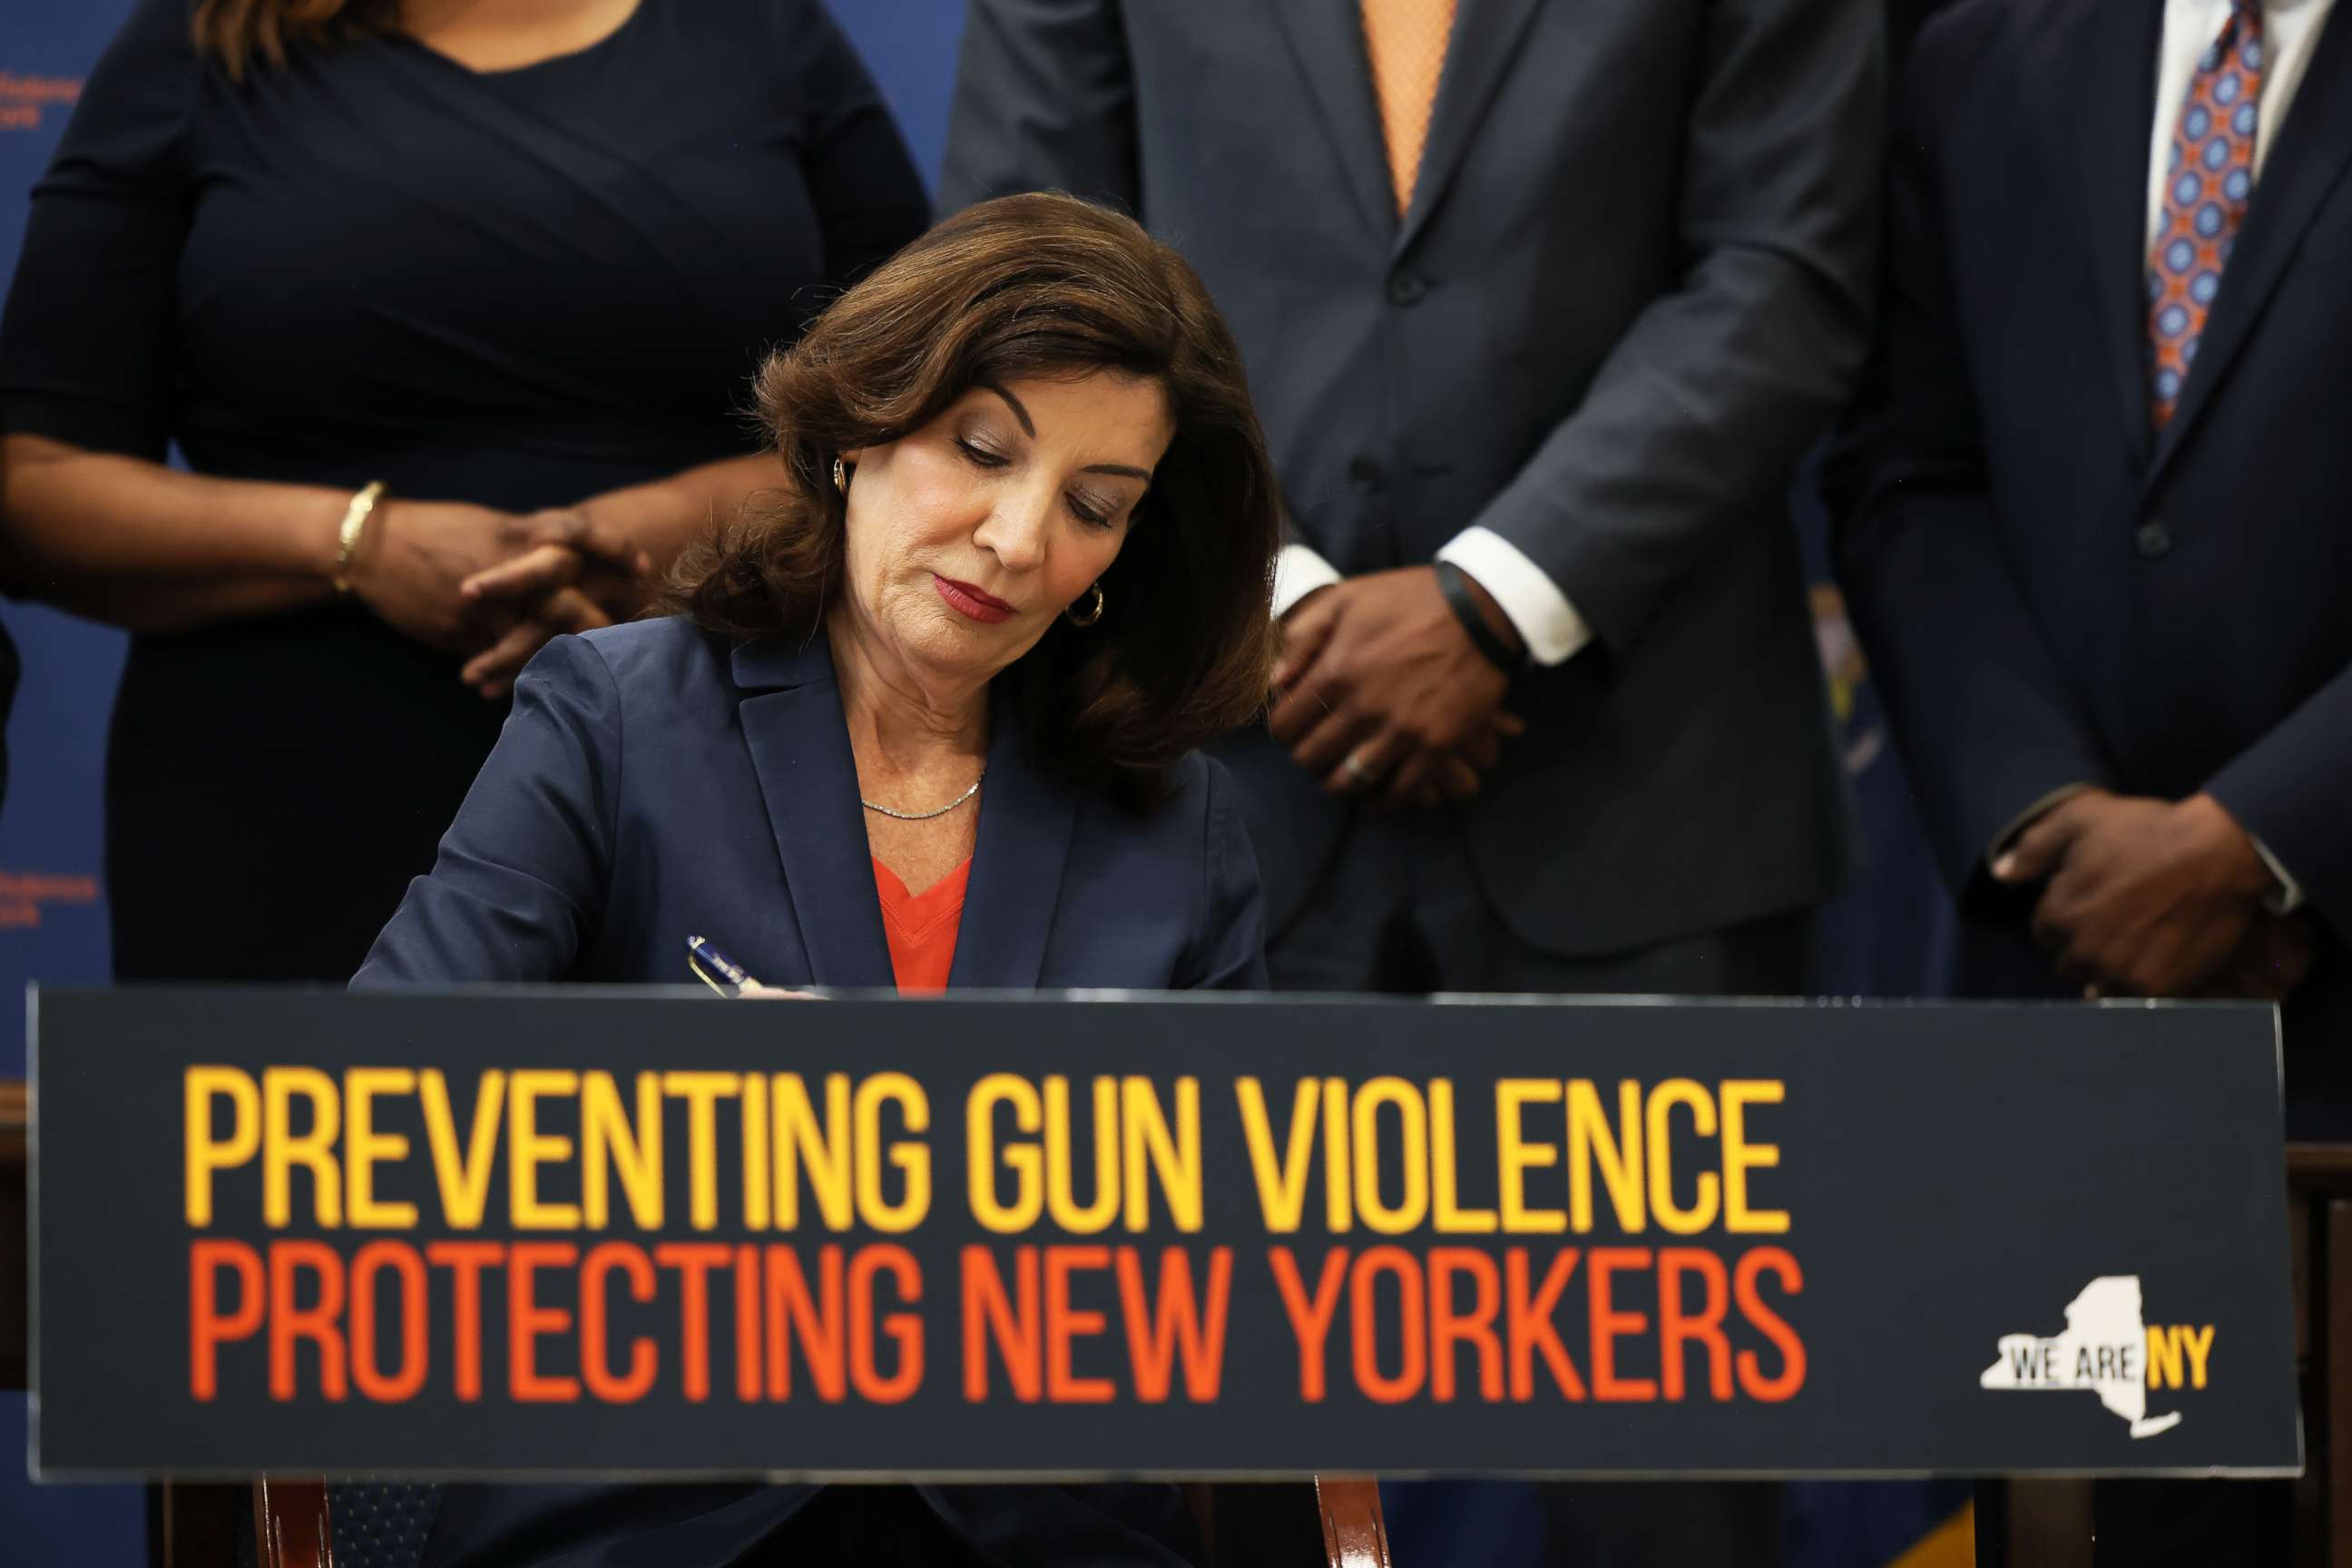 PHOTO: NEW YORK, NEW YORK - JUNE 06: Gov. Kathy Hochul signs legislation as she is surrounded by lawmakers during a bill signing ceremony at the Northeast Bronx YMCA on June 06, 2022 in New York City. 